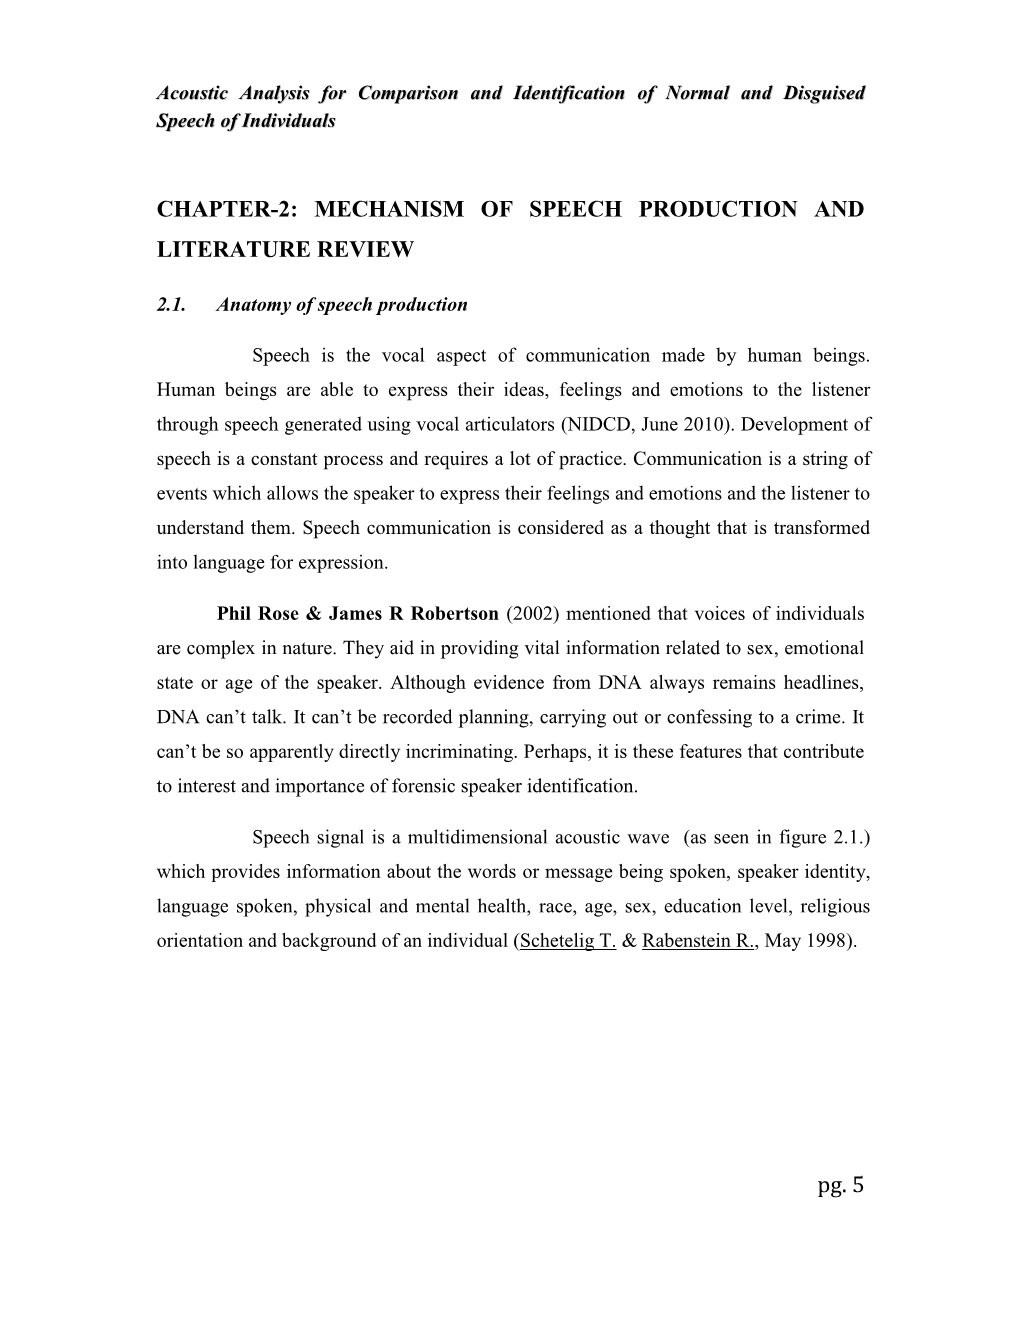 Pg. 5 CHAPTER-2: MECHANISM of SPEECH PRODUCTION AND